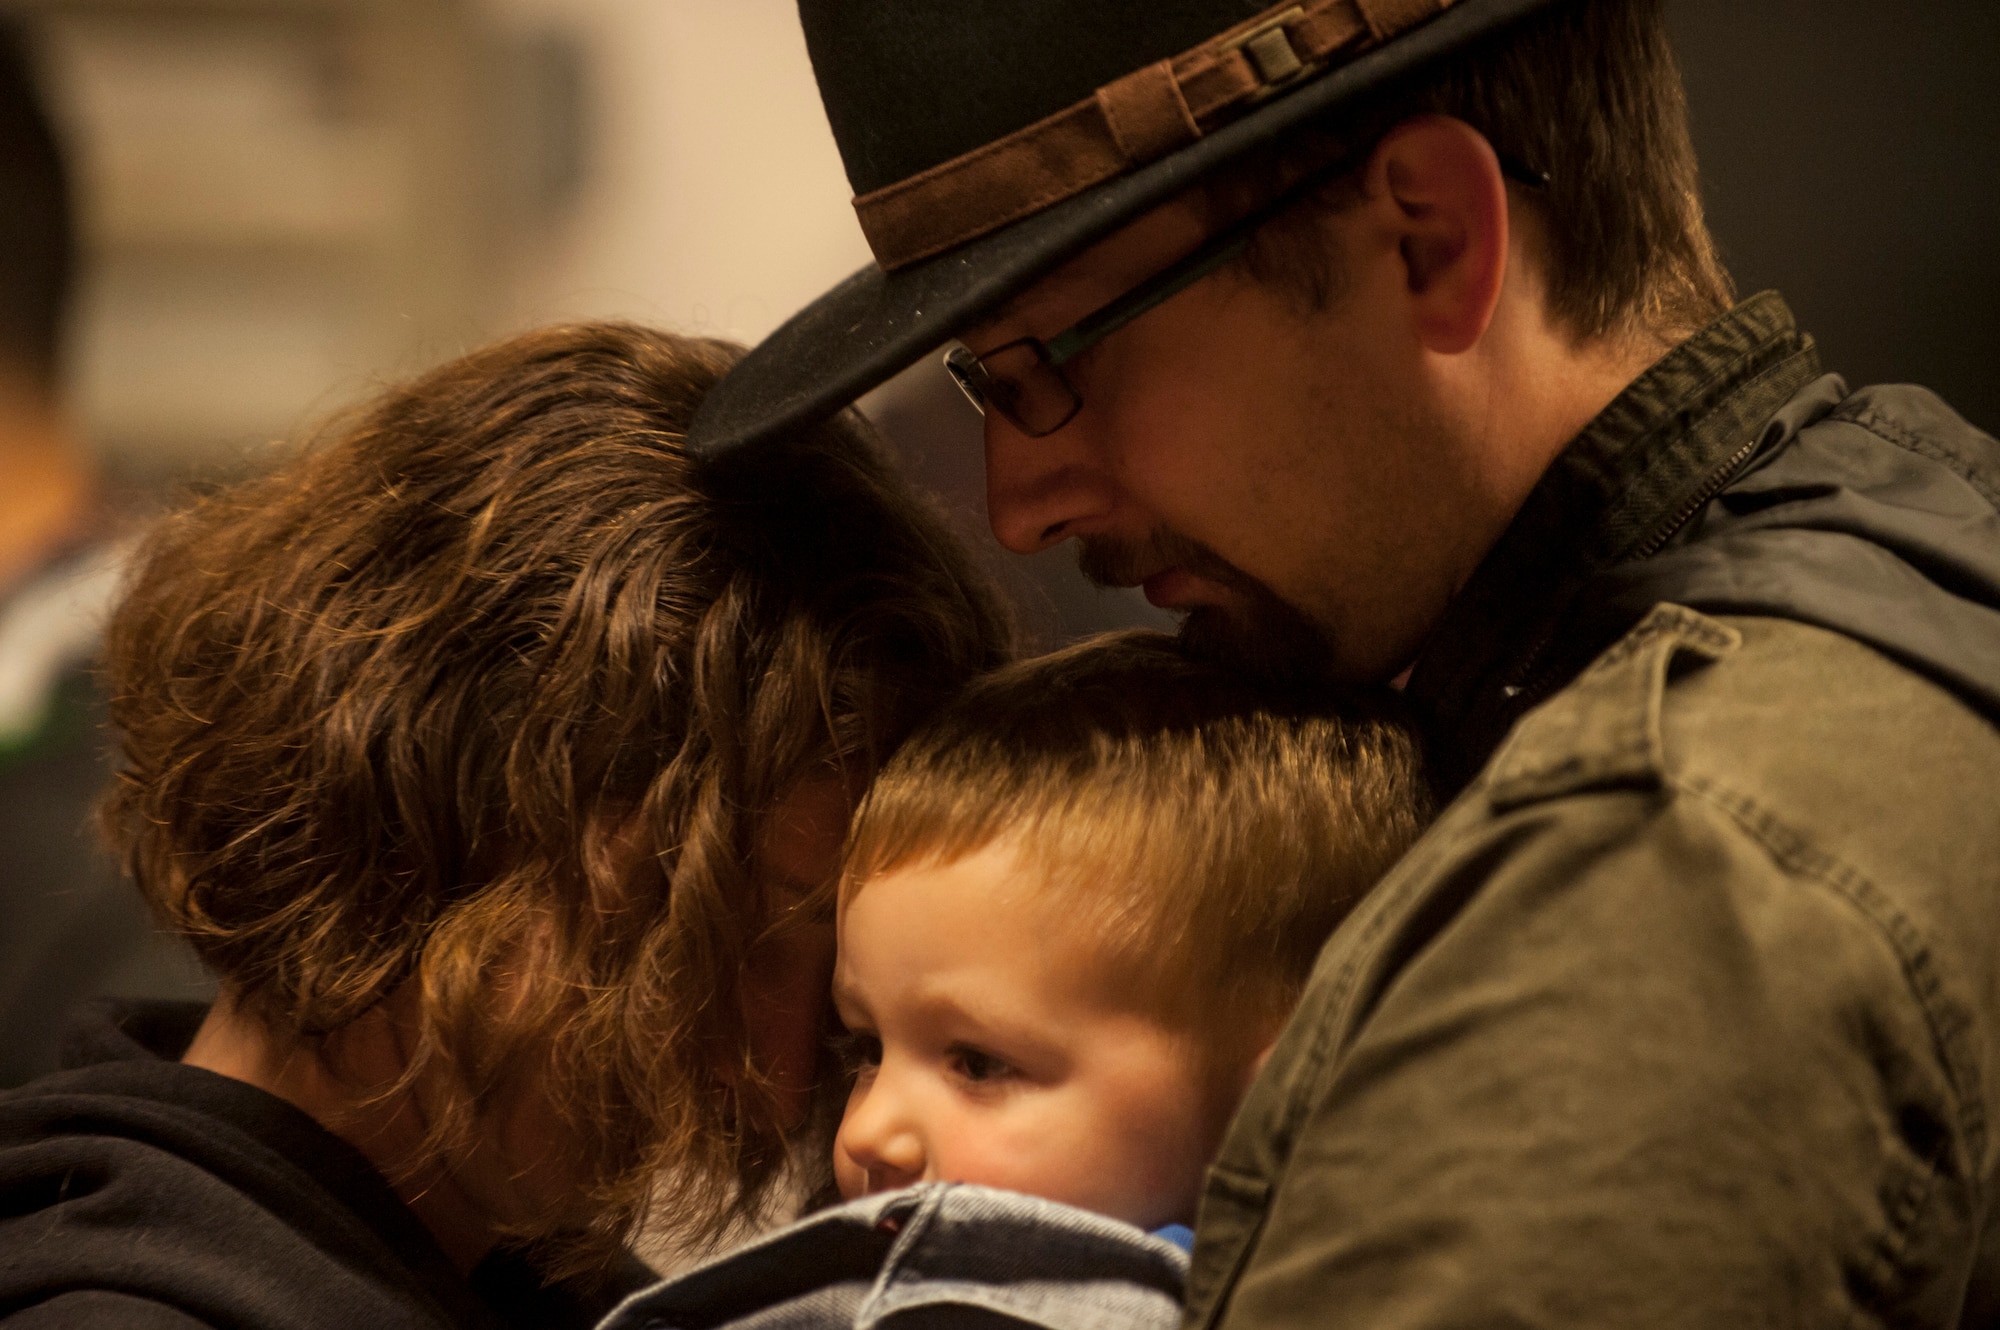 U.S. Air Force Staff Sgt. Amanda Bailey, a 606th Air Control Squadron electronic protection technician, and her husband Chris hold their son William prior to leaving on a deployment Oct. 7, 2014, at Spangdahlem Air Base, Germany. Bailey is one of many Airmen deployed from the 606th ACS to support Operation Enduring Freedom. (U.S. Air Force photo by Senior Airman Rusty Frank/Released)